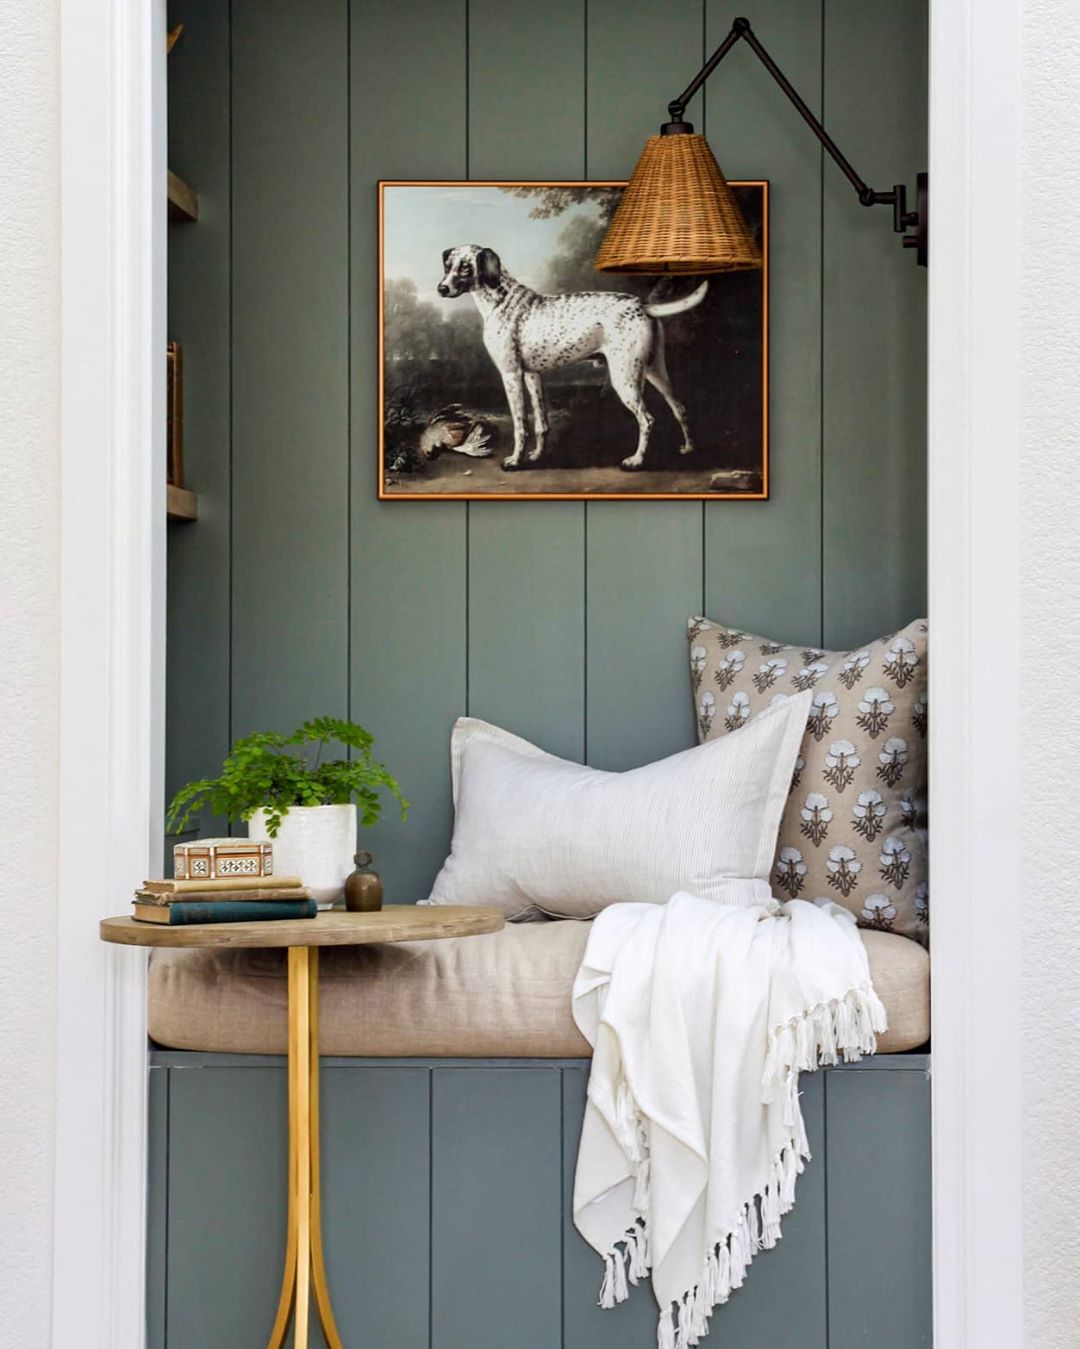 Reading Nook Separated by Different Color Paint. Photo by Instagram user @wildflowerhomeblog